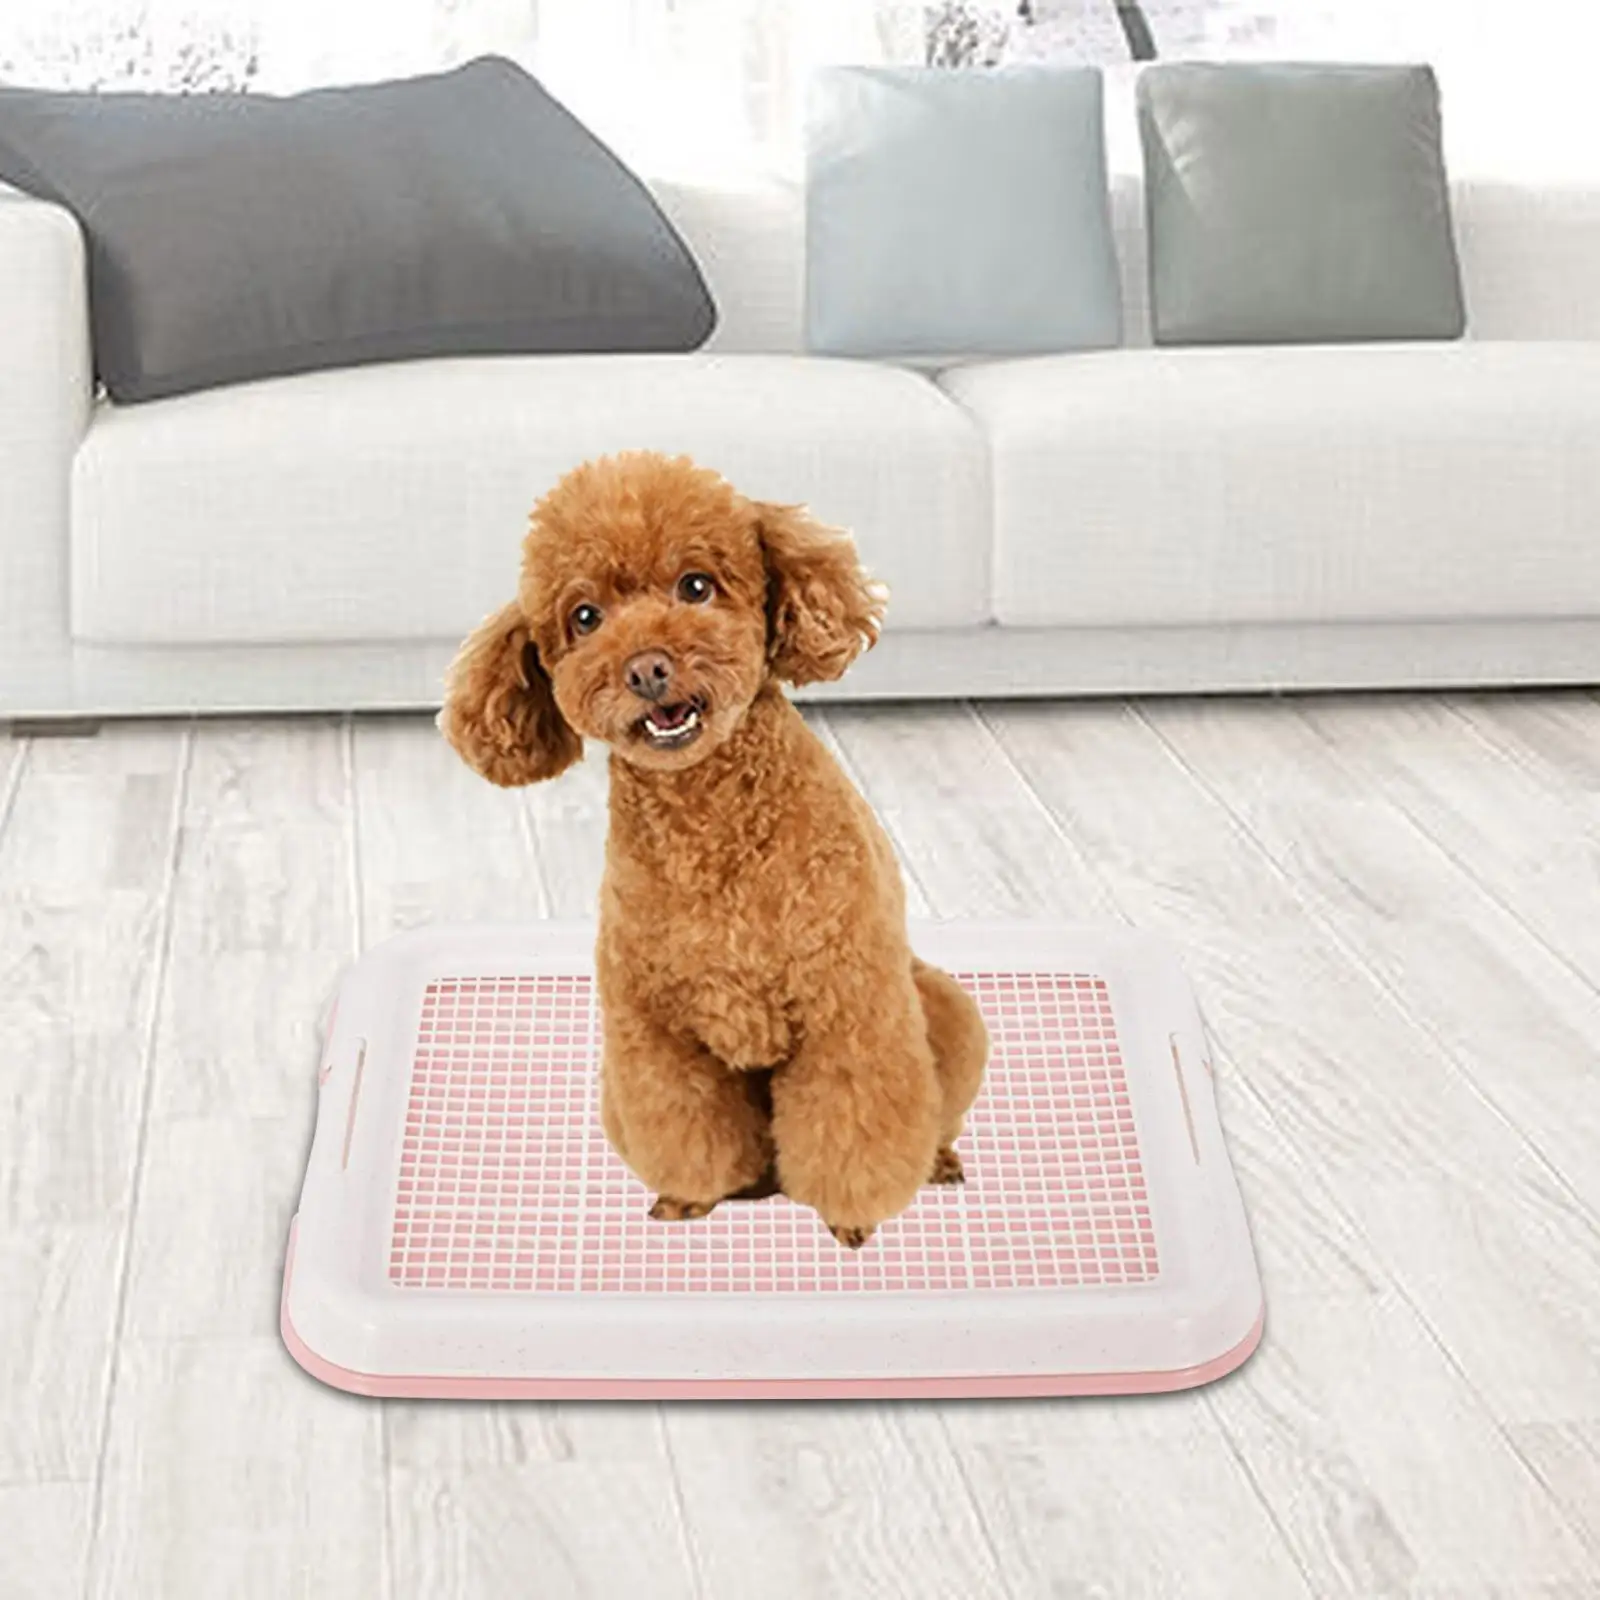 Dog Potty Toilet Training Tray Potty Trainer Corner for Puppies Small Dogs